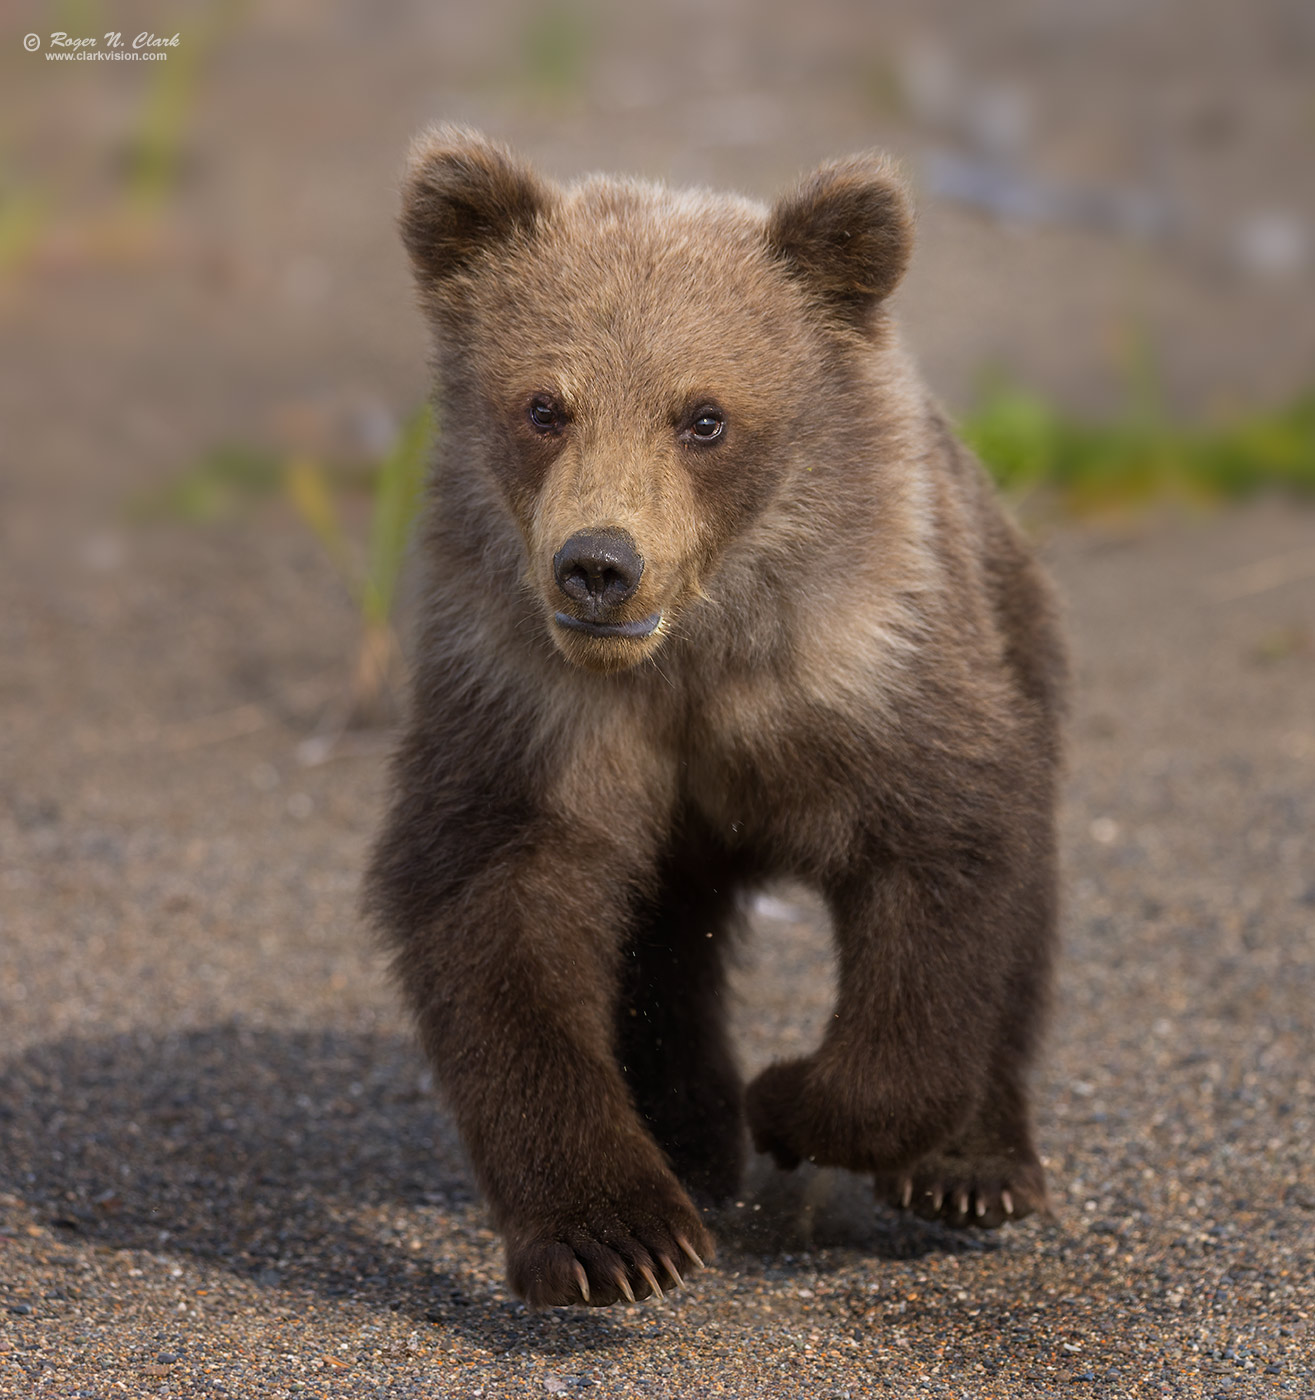 image bear-cub-ruuning-towards-me-c08-20-2023-1C-4C3A9590.e-1400s.jpg is Copyrighted by Roger N. Clark, www.clarkvision.com